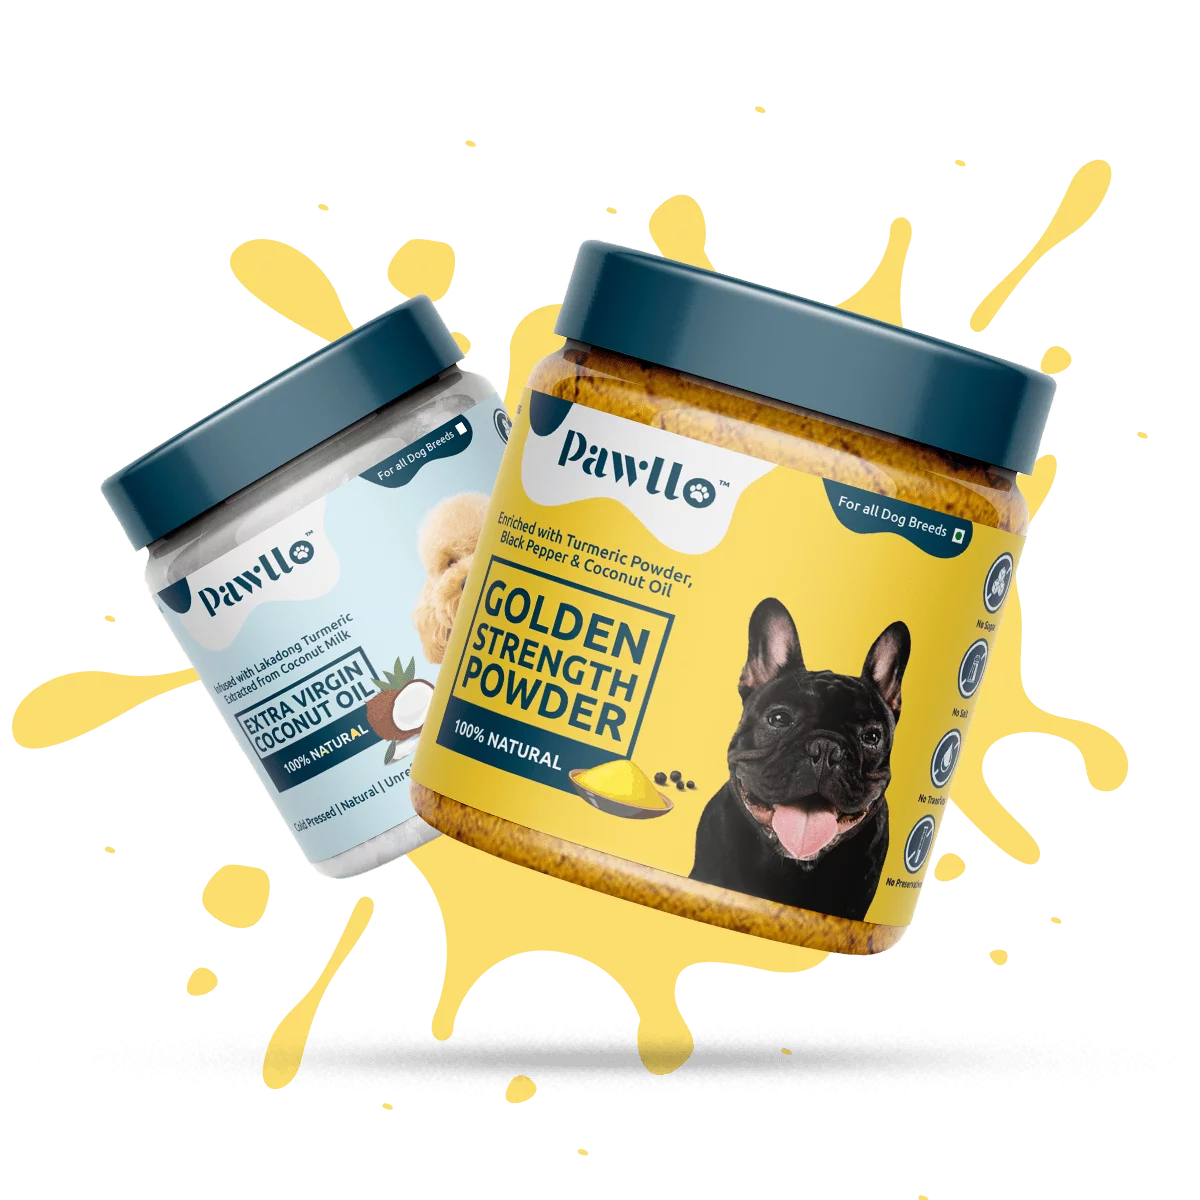 Golden Paste (Dogs) - Natural Superfood Blend with Turmeric and Black Pepper - 100% Natural